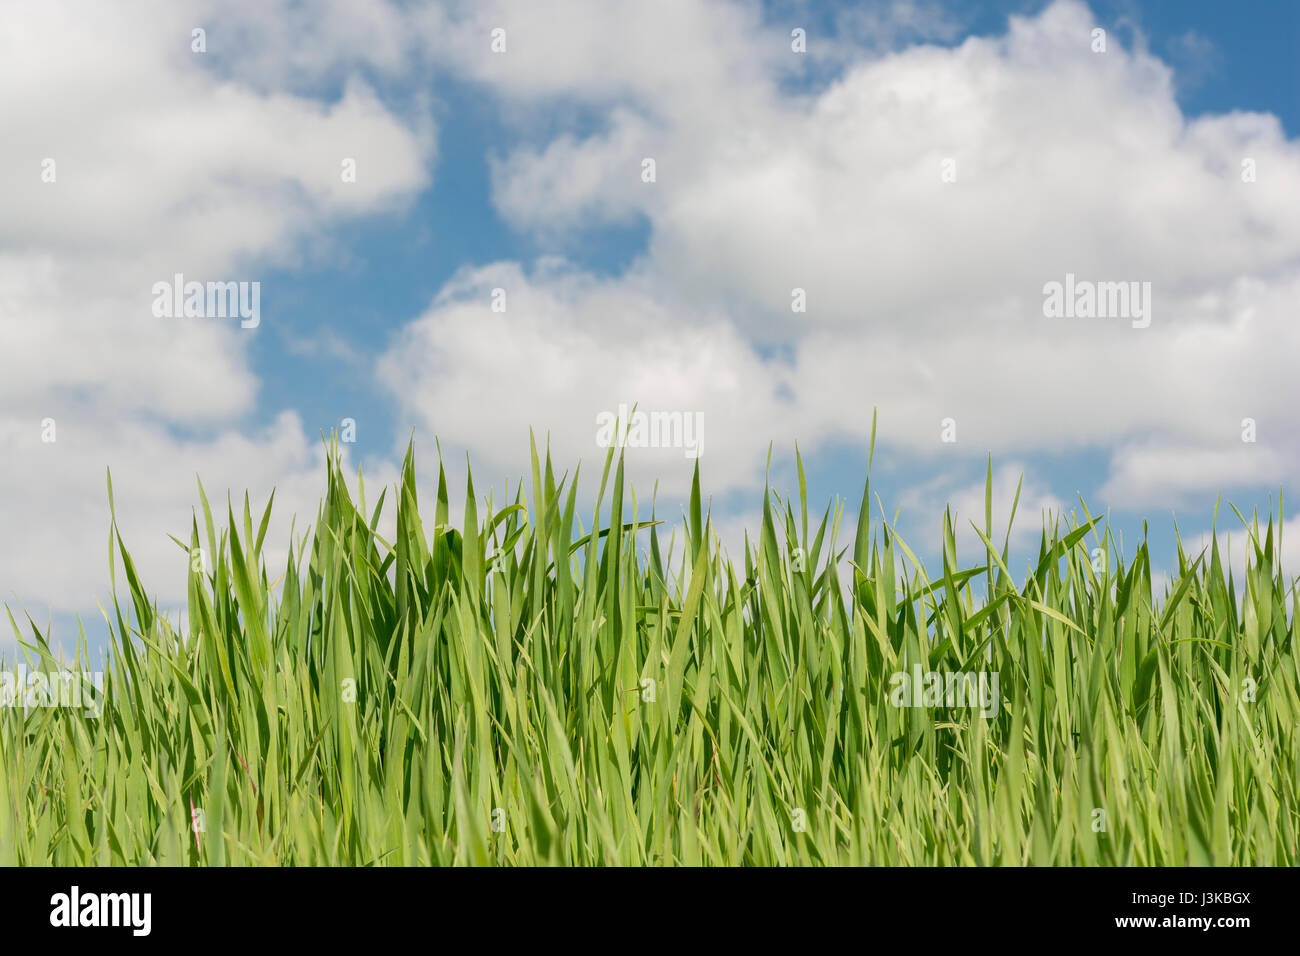 Fresh green grass against blue sky - metaphor for 'grass' sayings -  'Don’t Let the Grass Grow Under Your Feet, 'Head in the Clouds', economic growth. Stock Photo